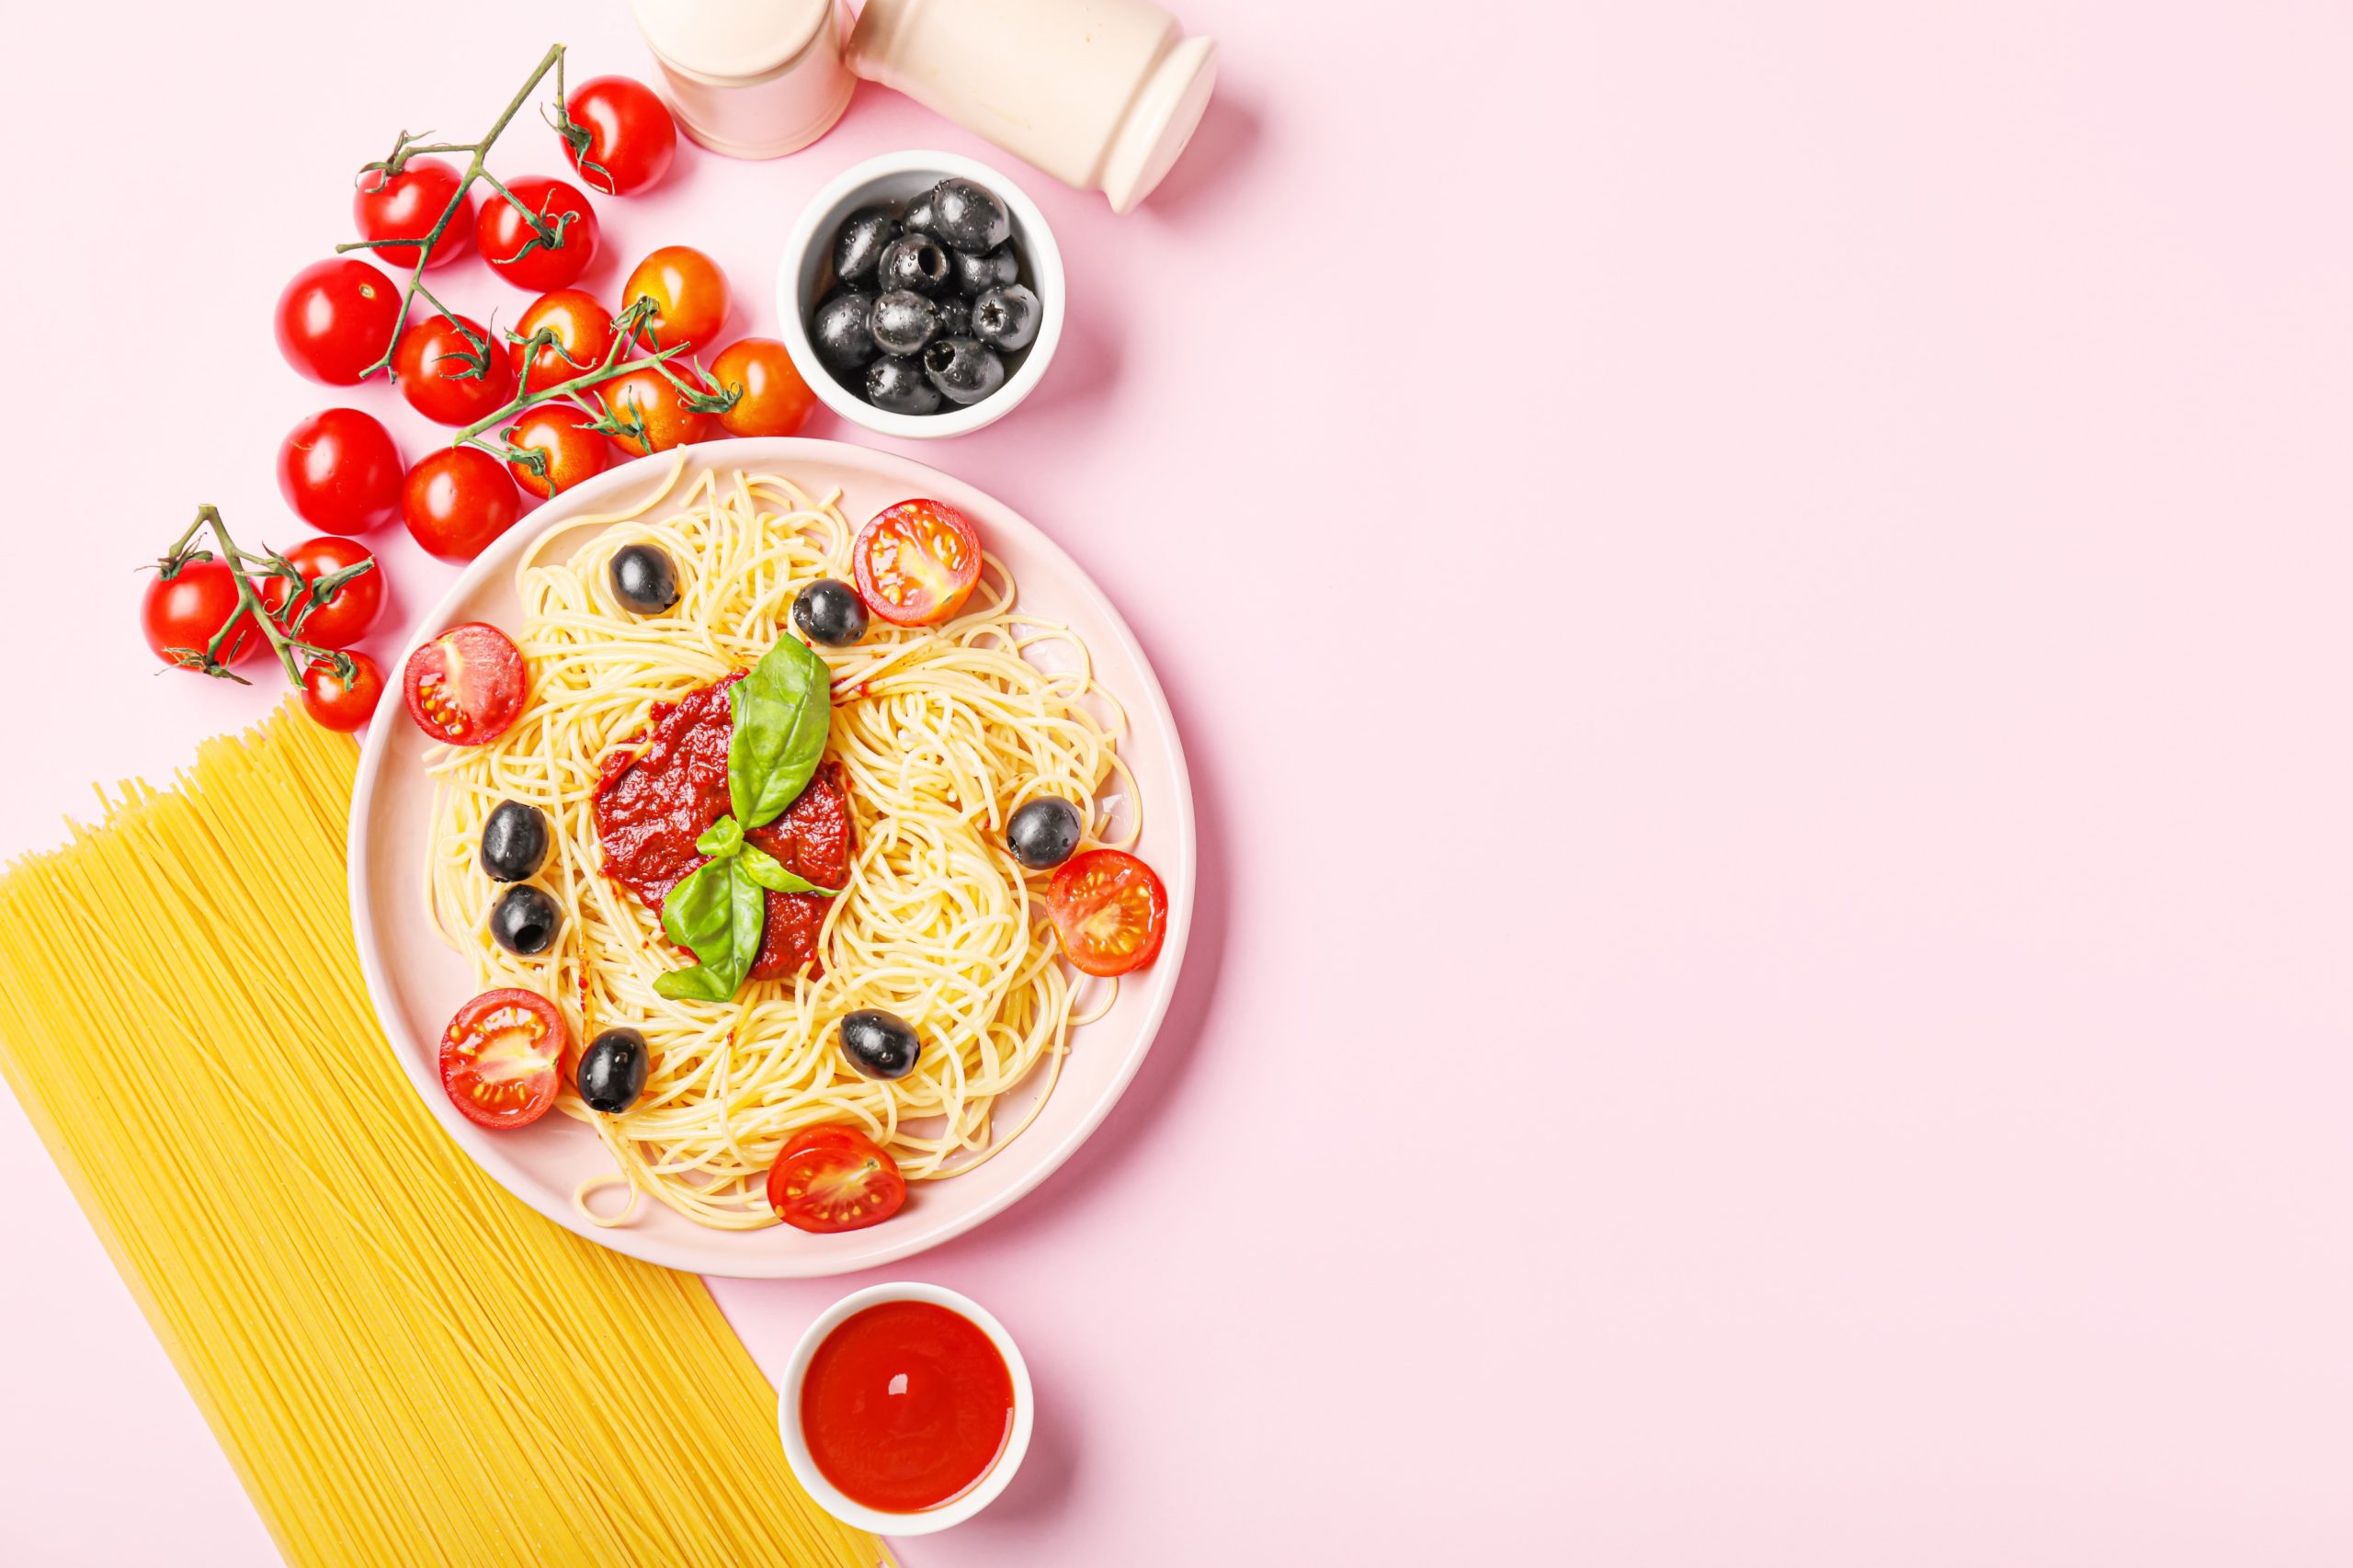 <img src="spaghetti.jpg" alt="spaghetti with tomatoes and olives"/> 